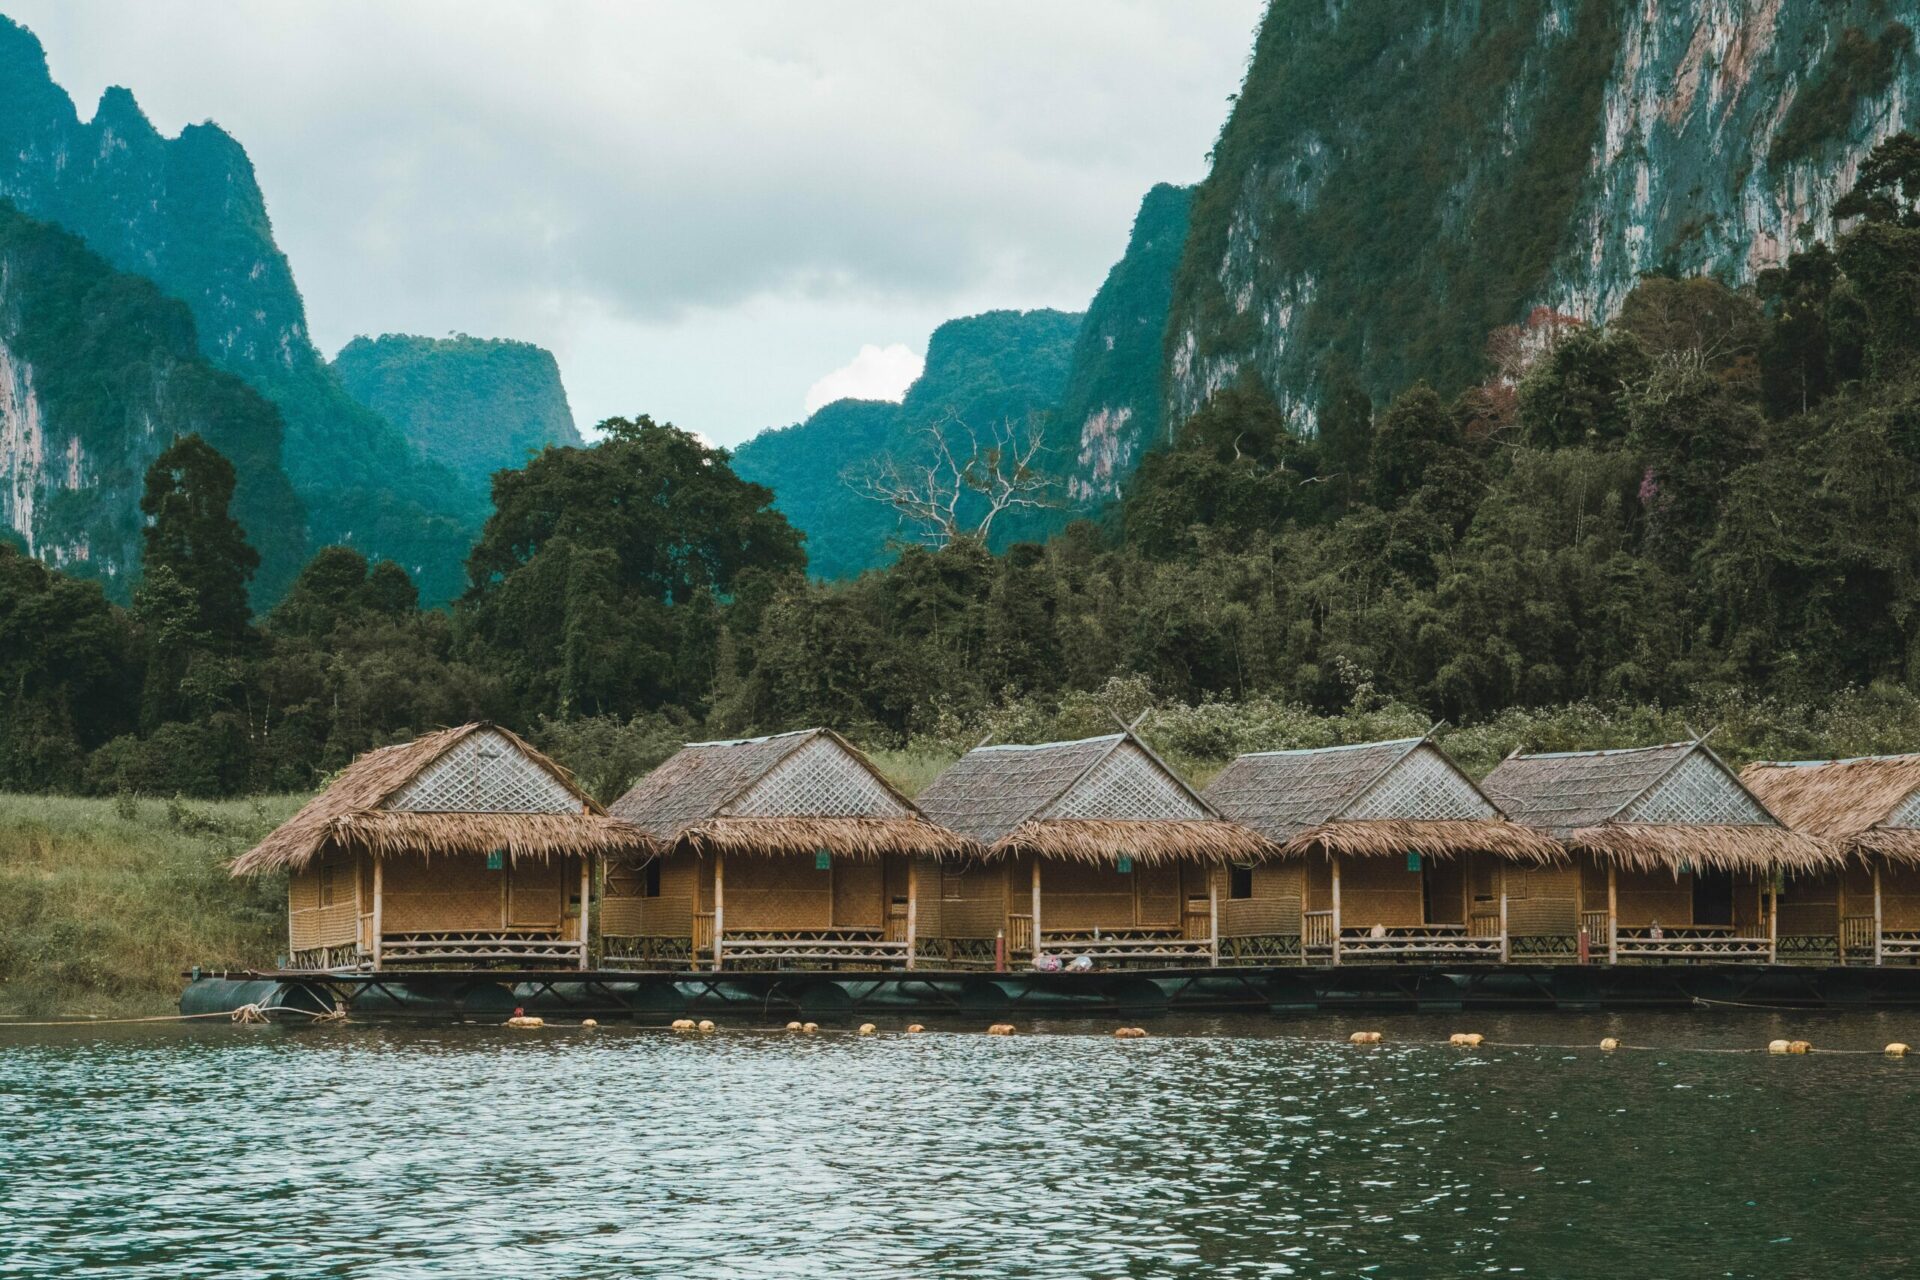 Hotel on the water in Khao Sok National Park, Thailand